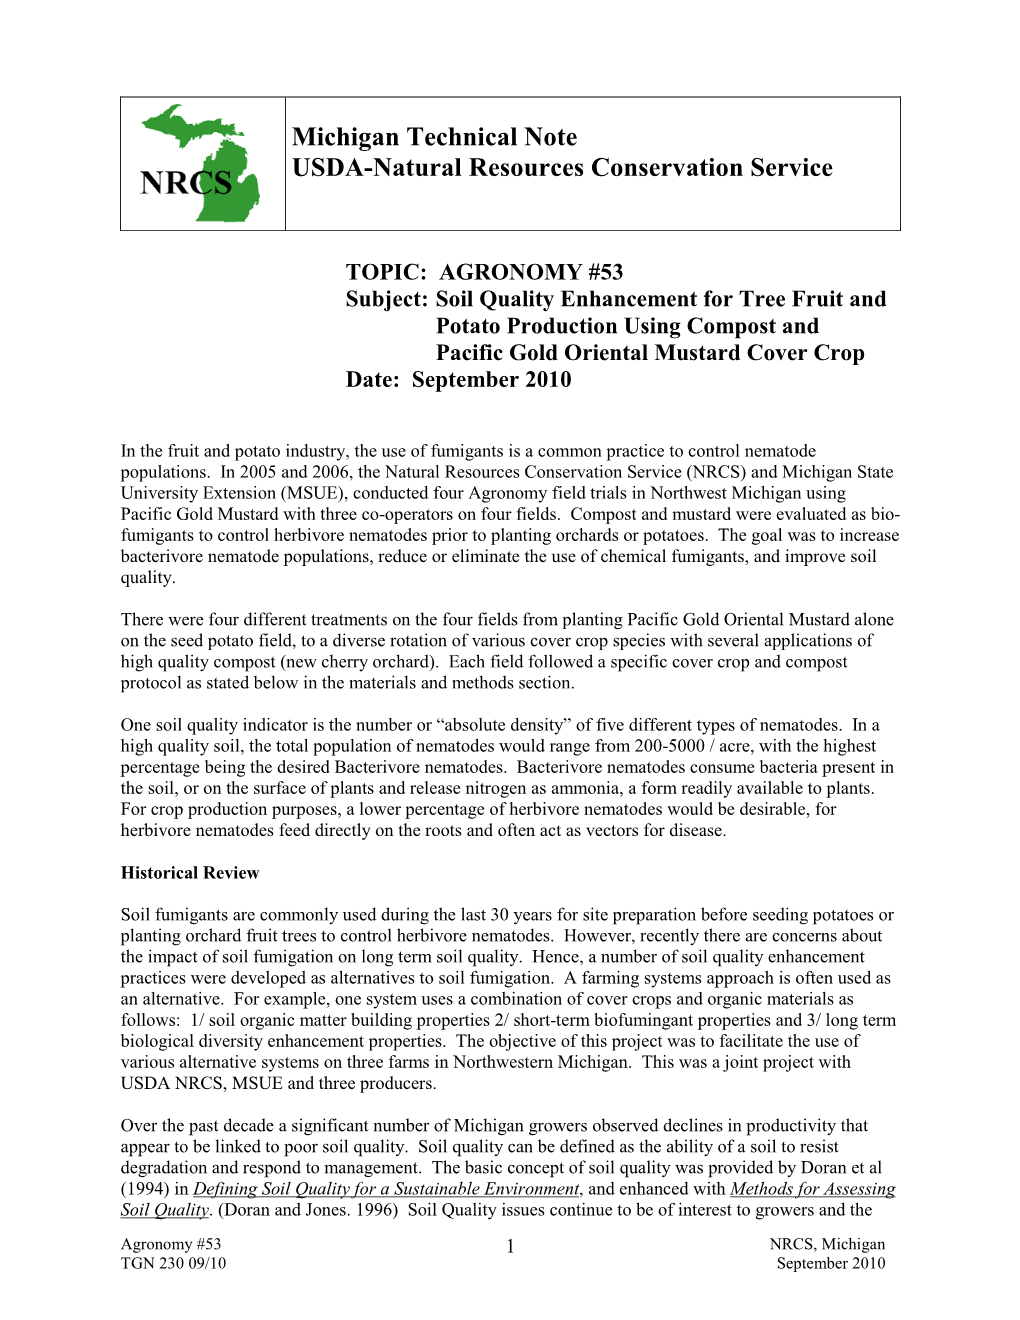 Michigan Technical Note USDA-Natural Resources Conservation Service